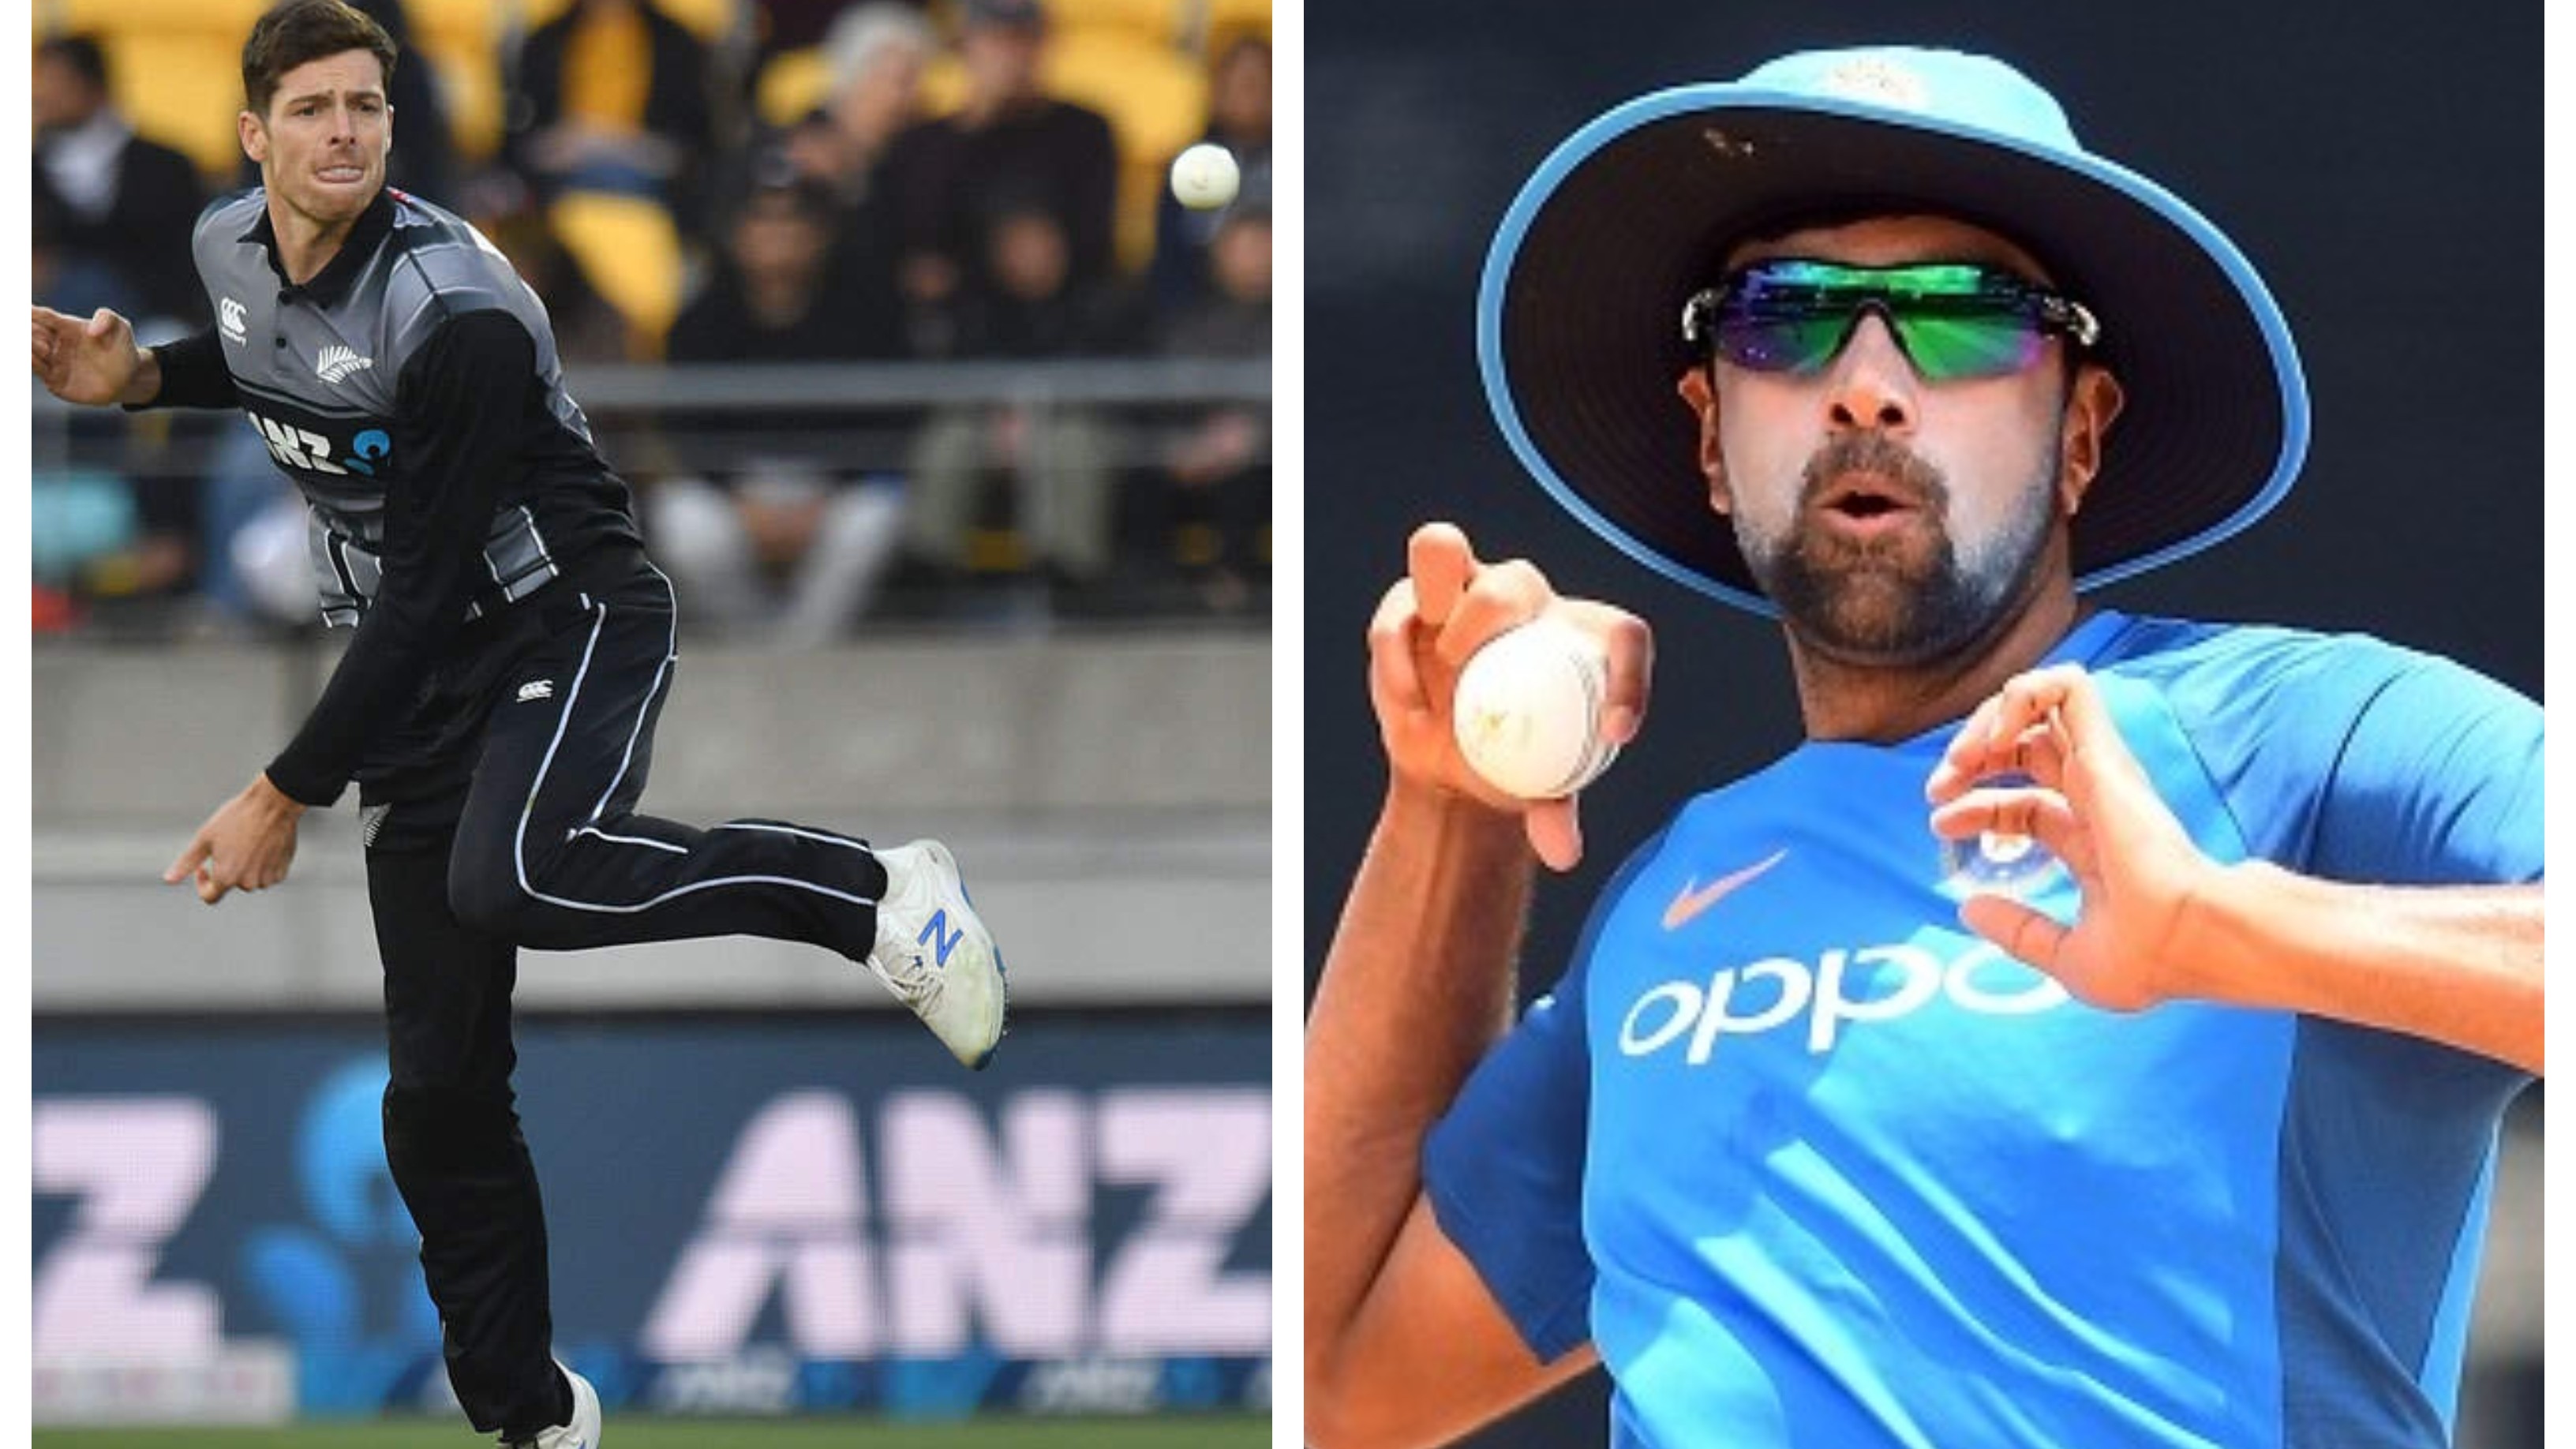 Mitchell Santner explains how R Ashwin’s carrom ball inspired him to try new variations